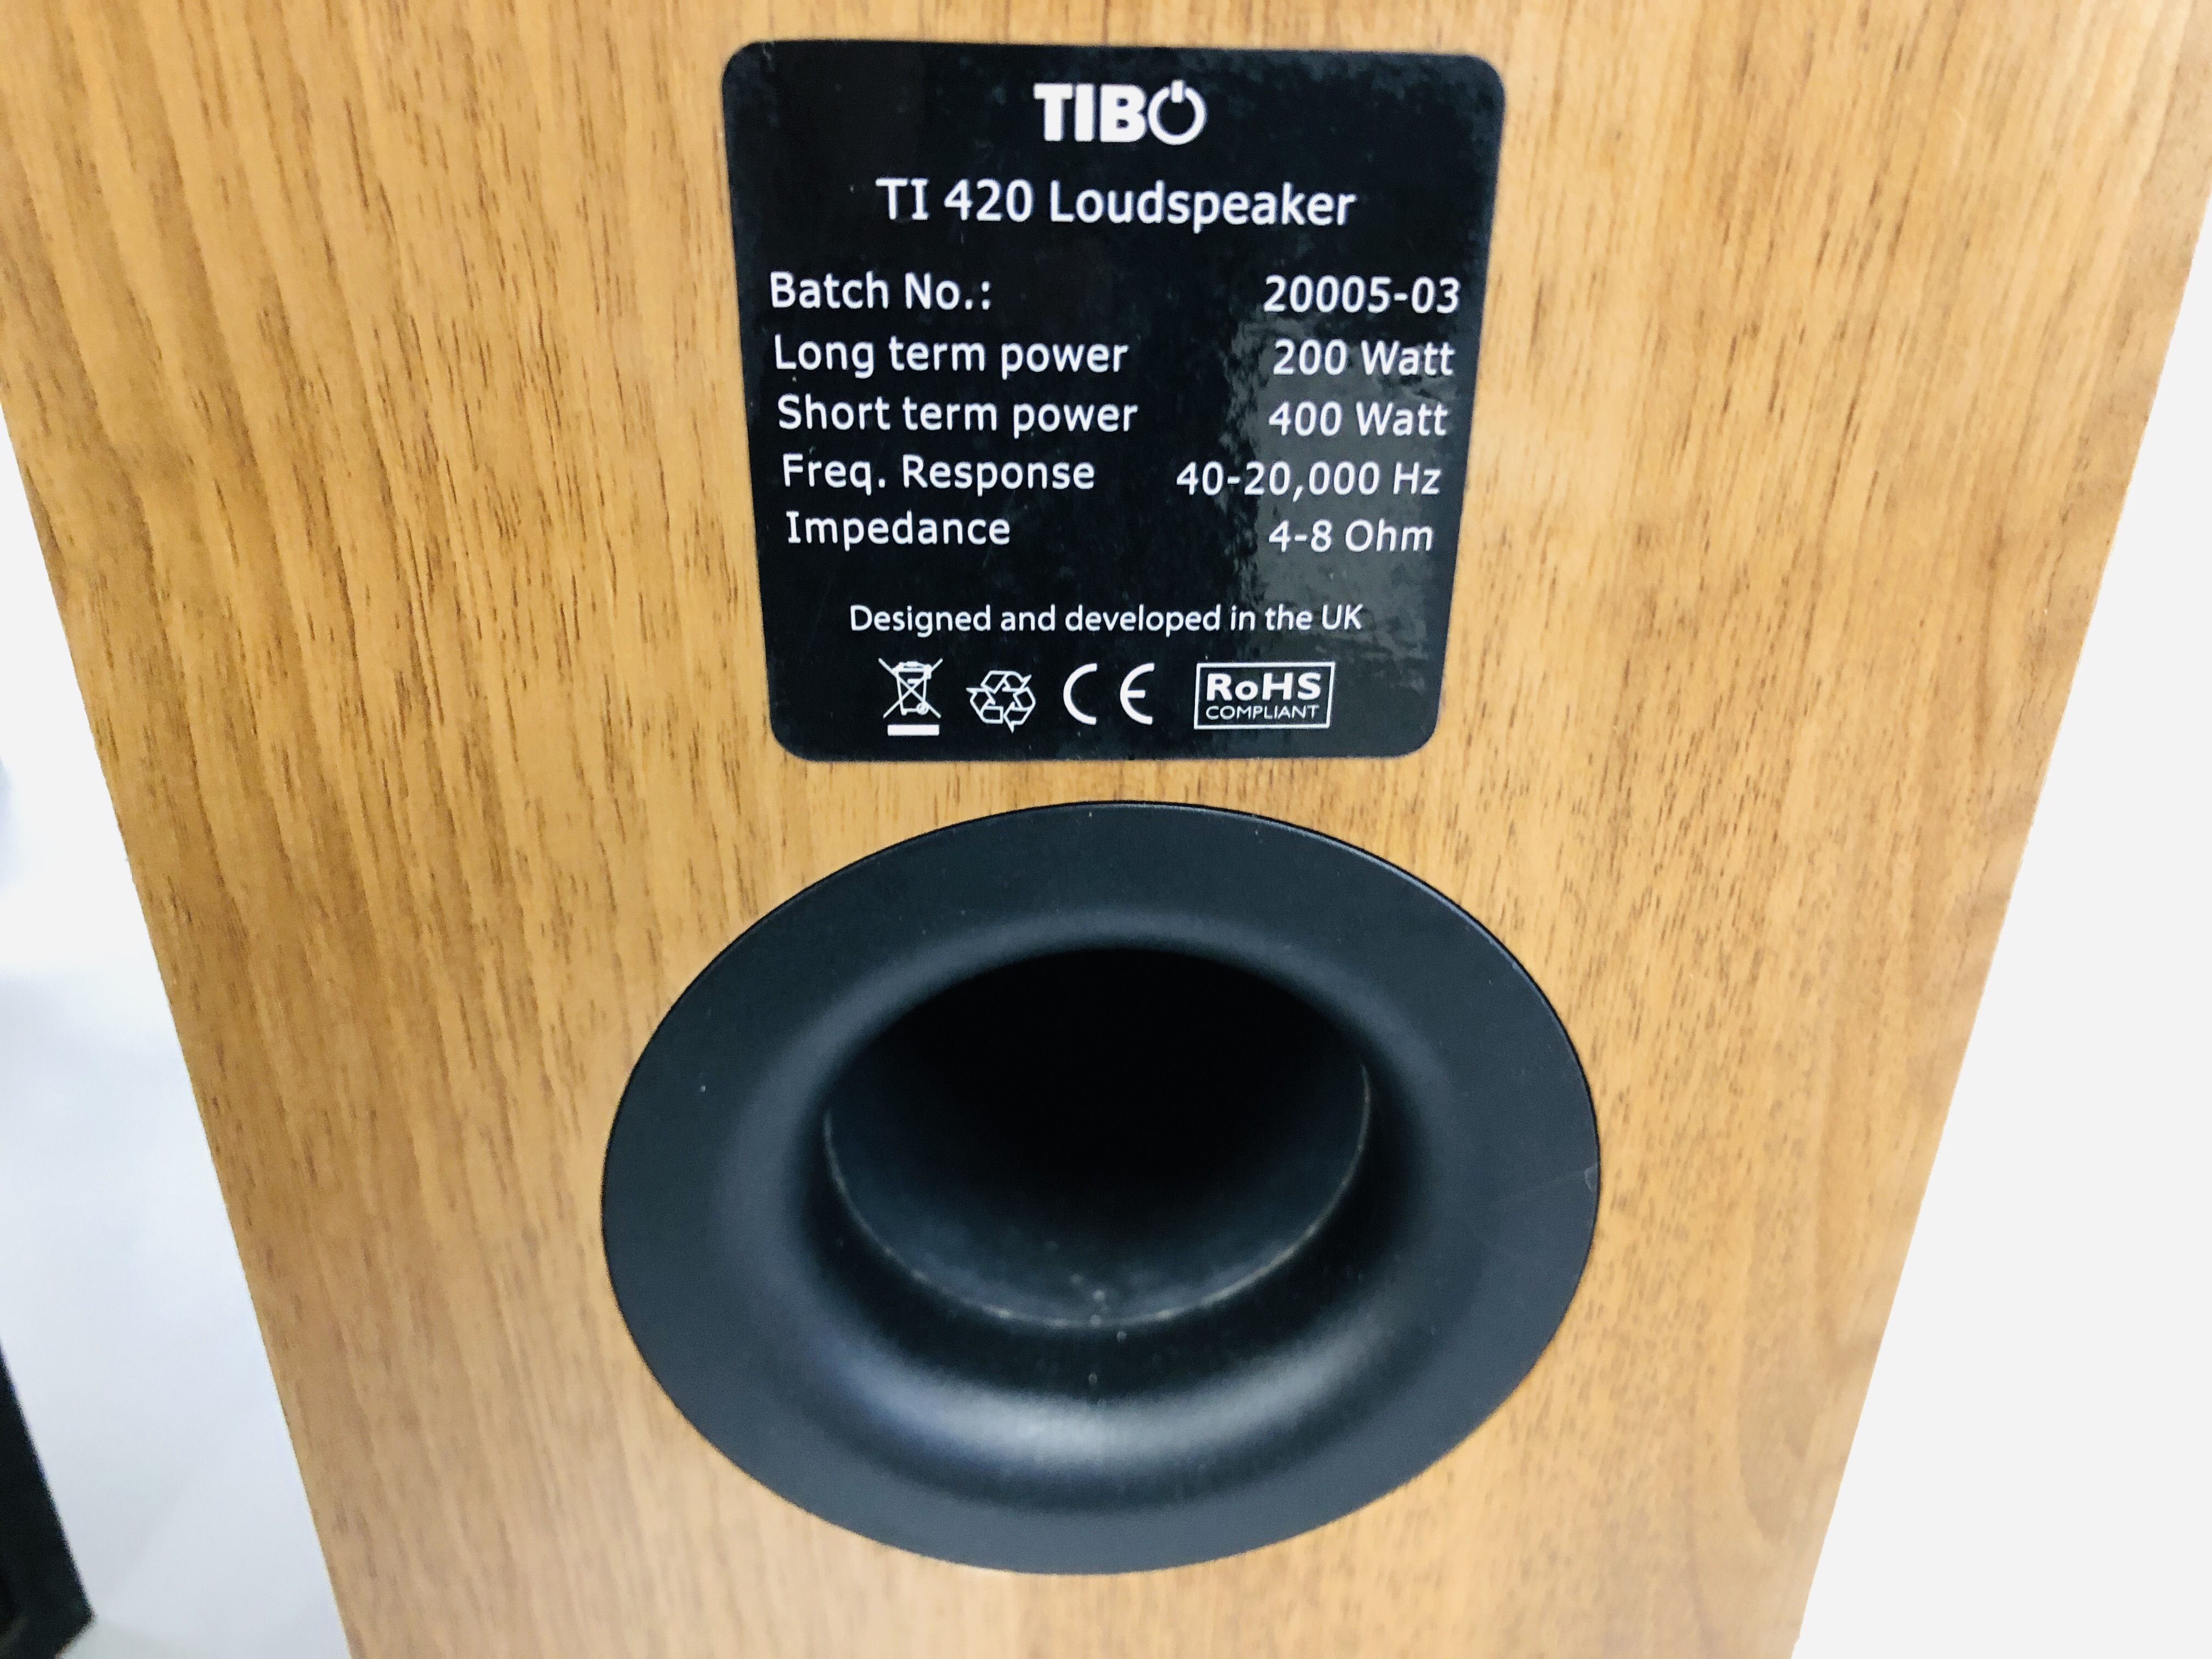 YAMAHA ACTIVE SERVO PROCESSING SUBWOOFER SYSTEM XST-SW80 ALONG WITH A PAIR OF FLOOR STANDING TIB - Image 6 of 8